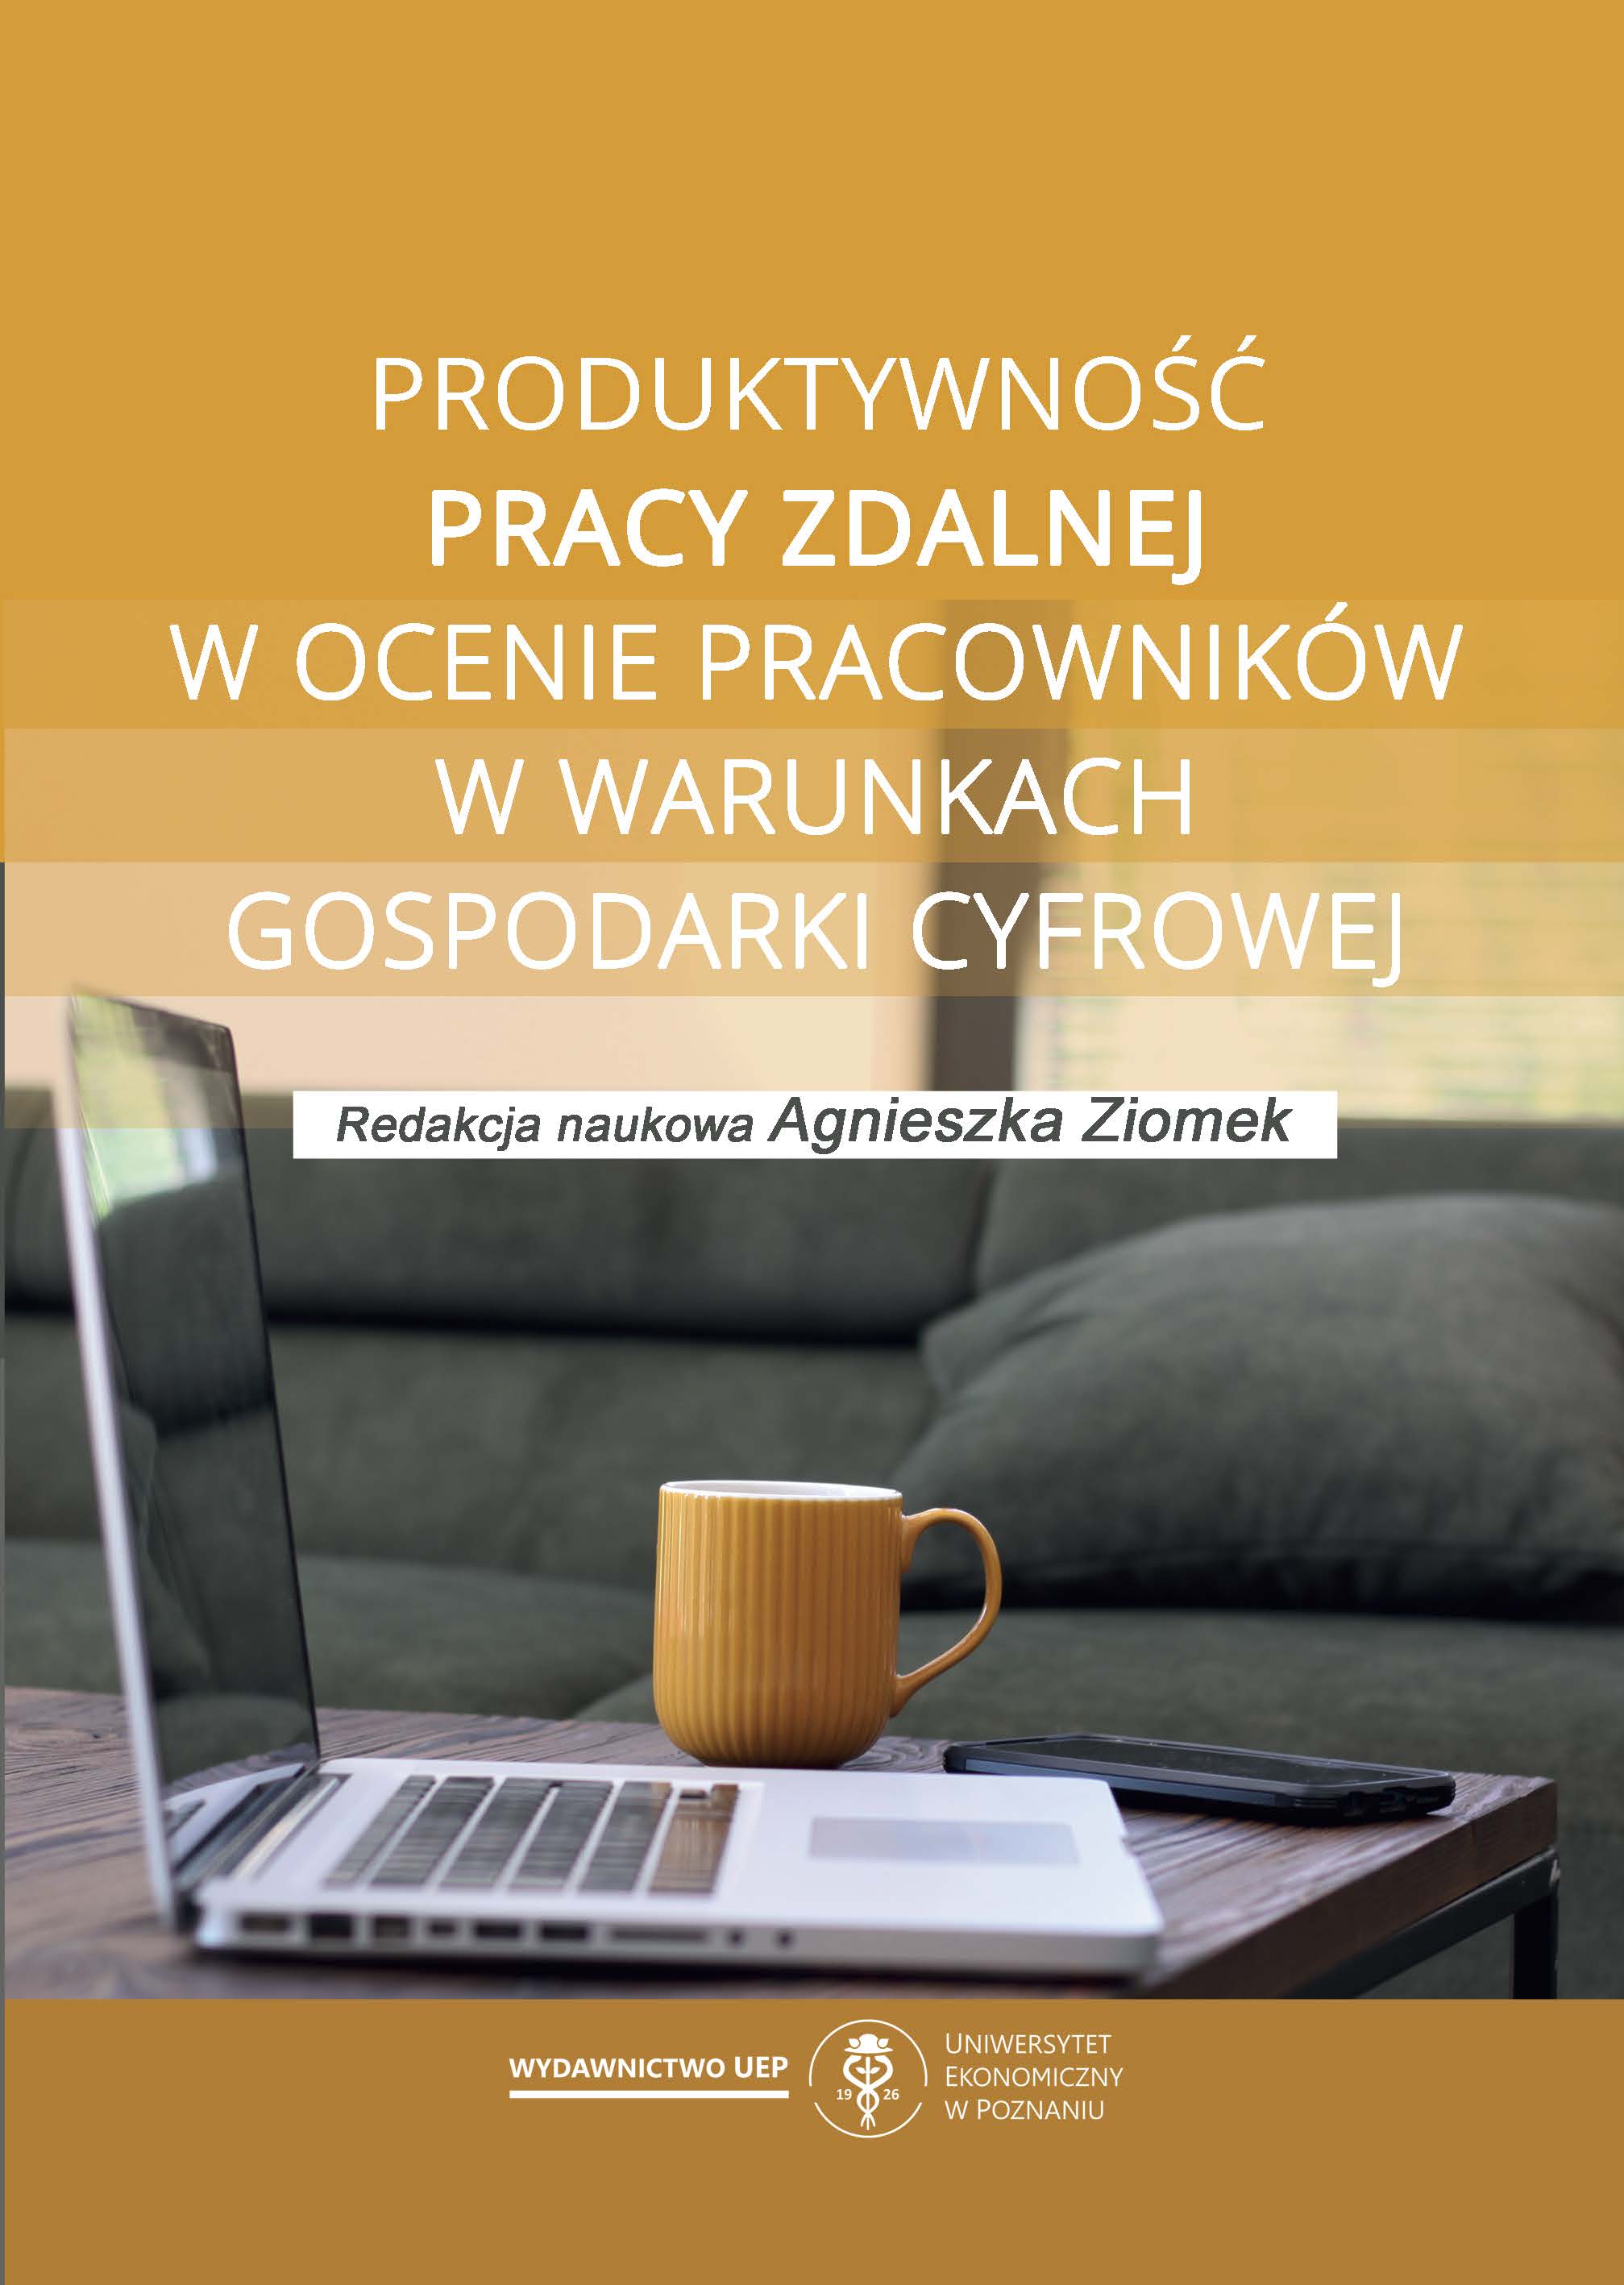 Productivity of remote working as assessed by employees in the digital economy